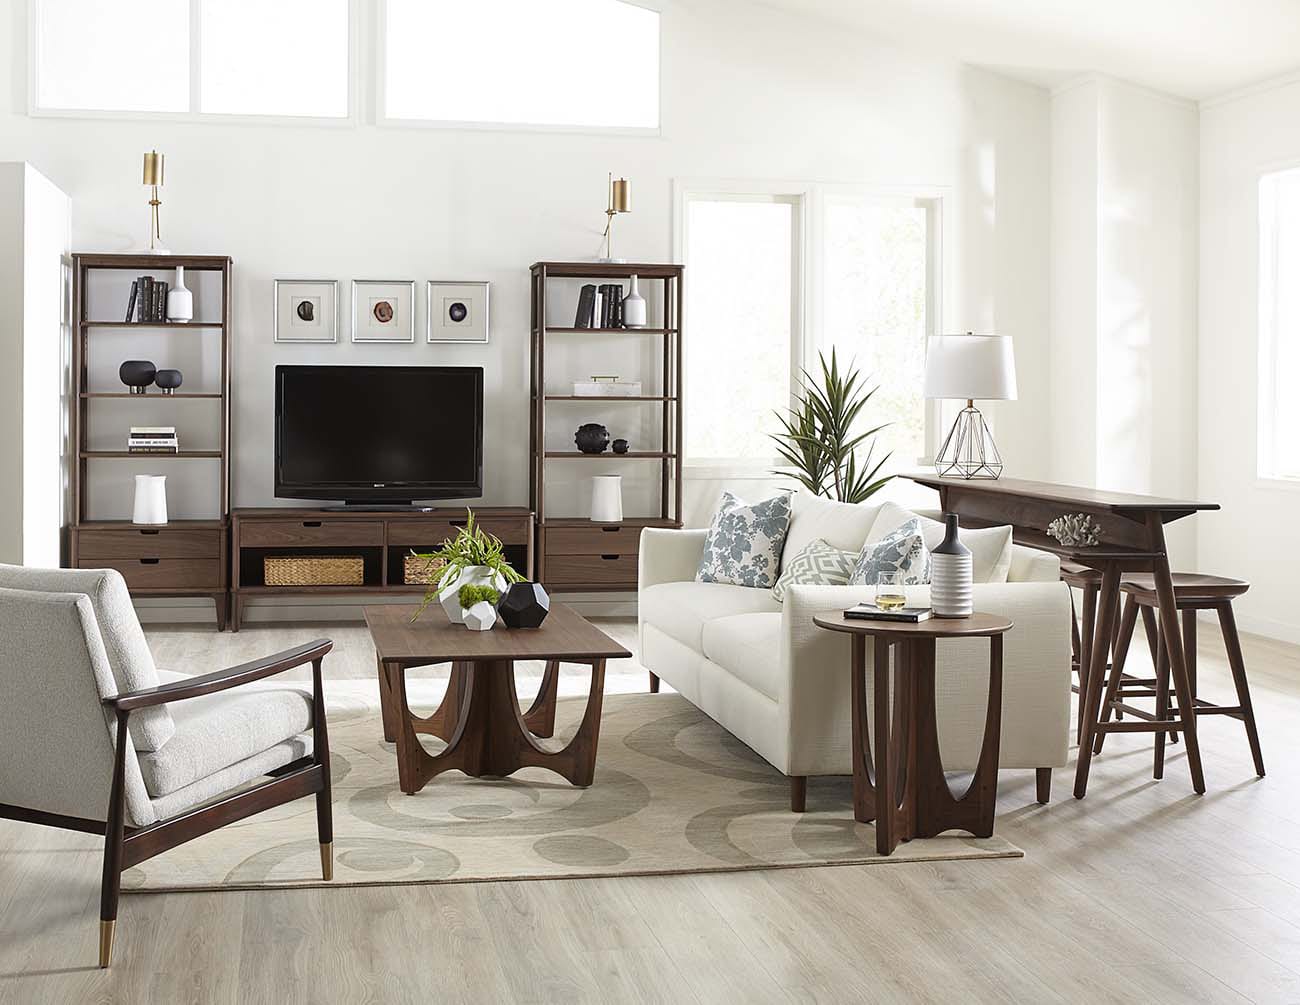 Living room scene featuring Stickley's Walnut Grove collection with a white sofa and chair, wood entertainment center, wood coffee and side tables, and a wood gathering table with stools.